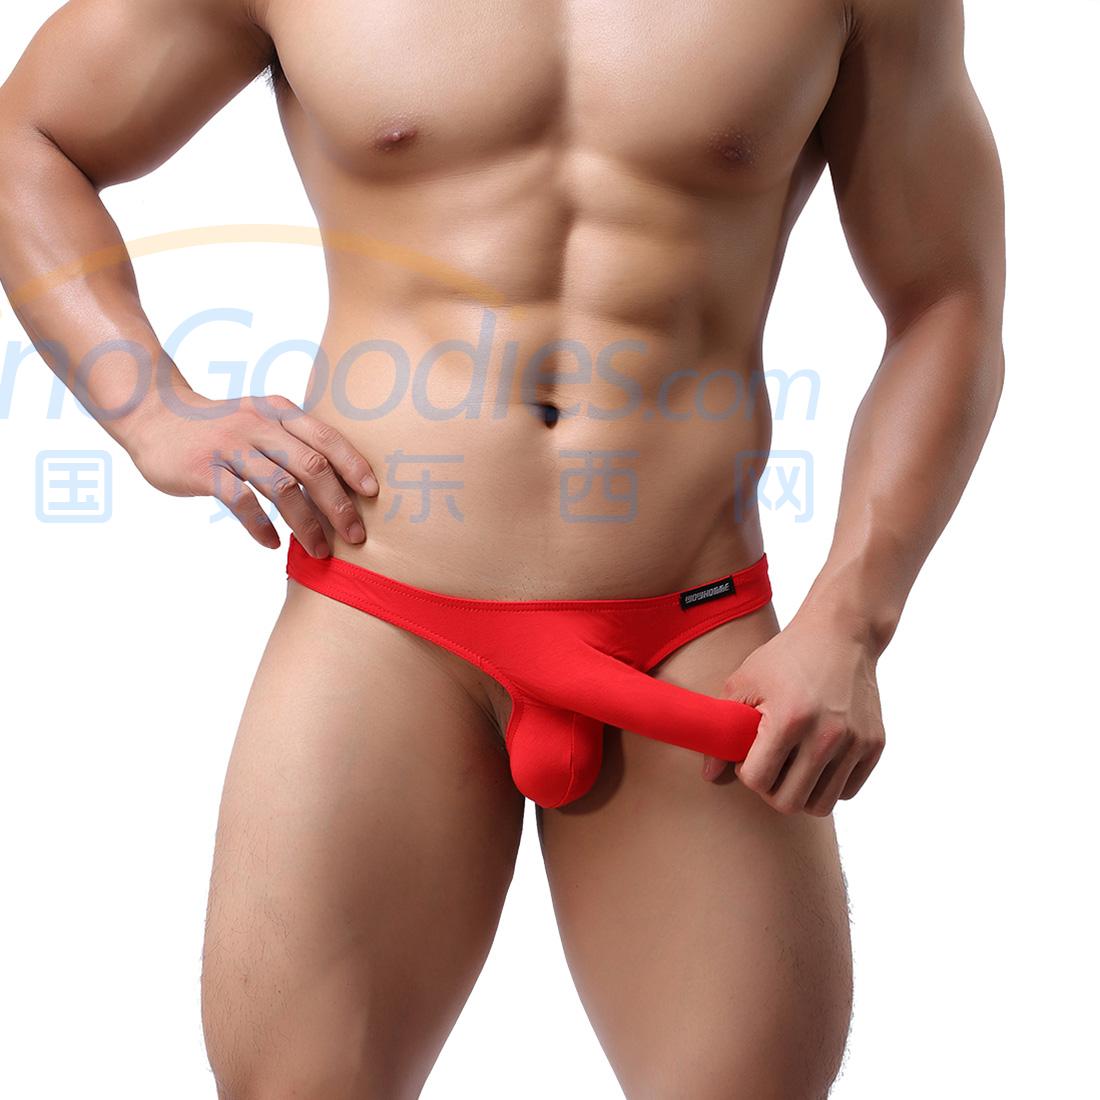 Men's Sexy Lingerie Underwear Modal Triangle Pants Shorts with Penis Sheath JET Bikini WH9 Red M